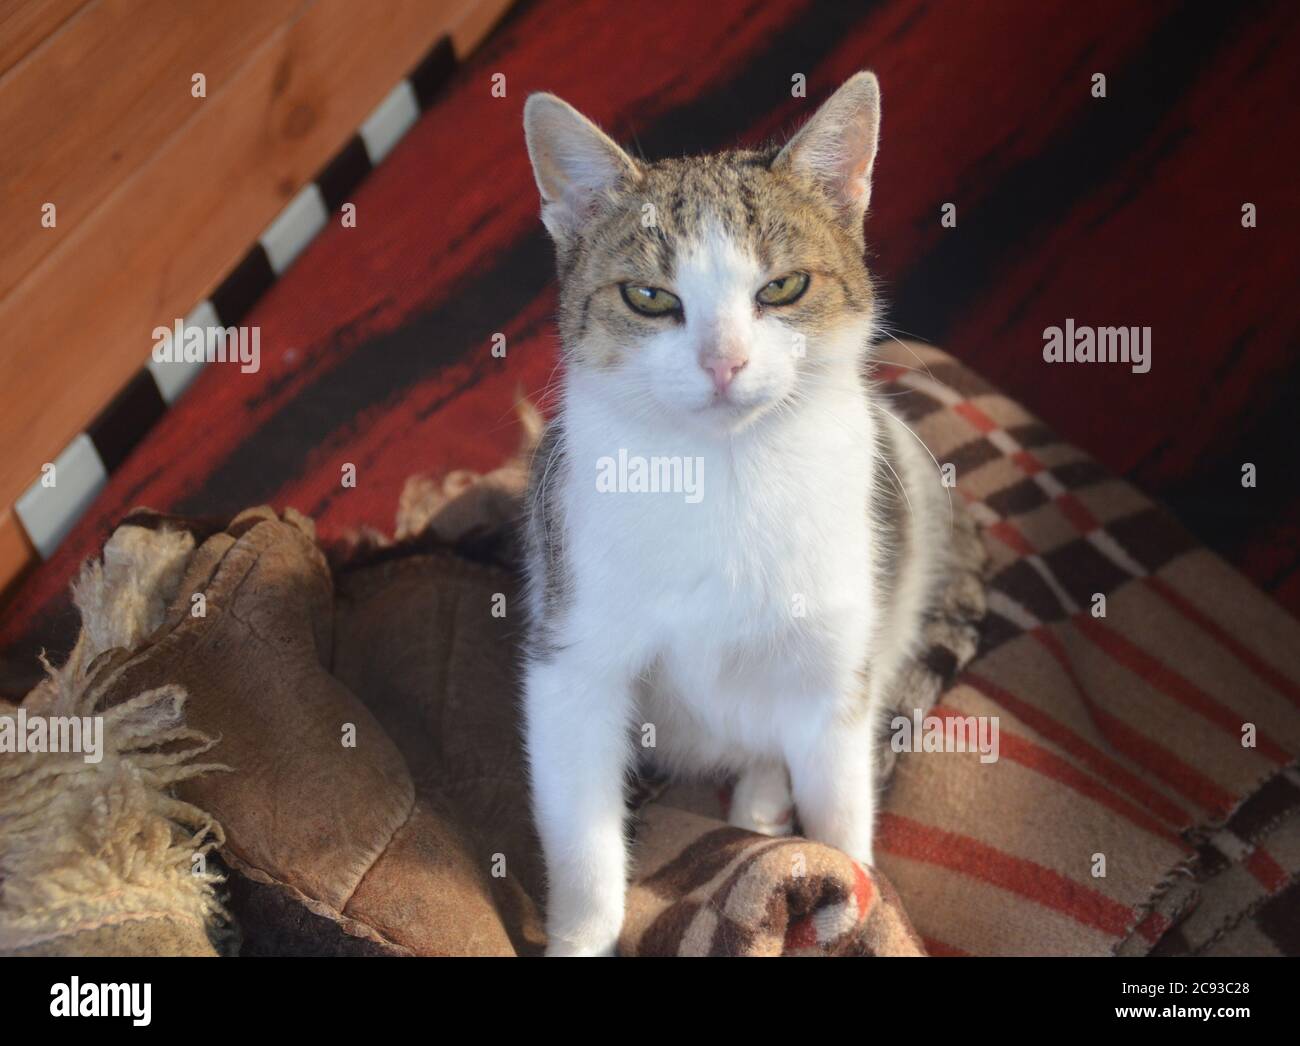 Cat is laying on coverlet Stock Photo